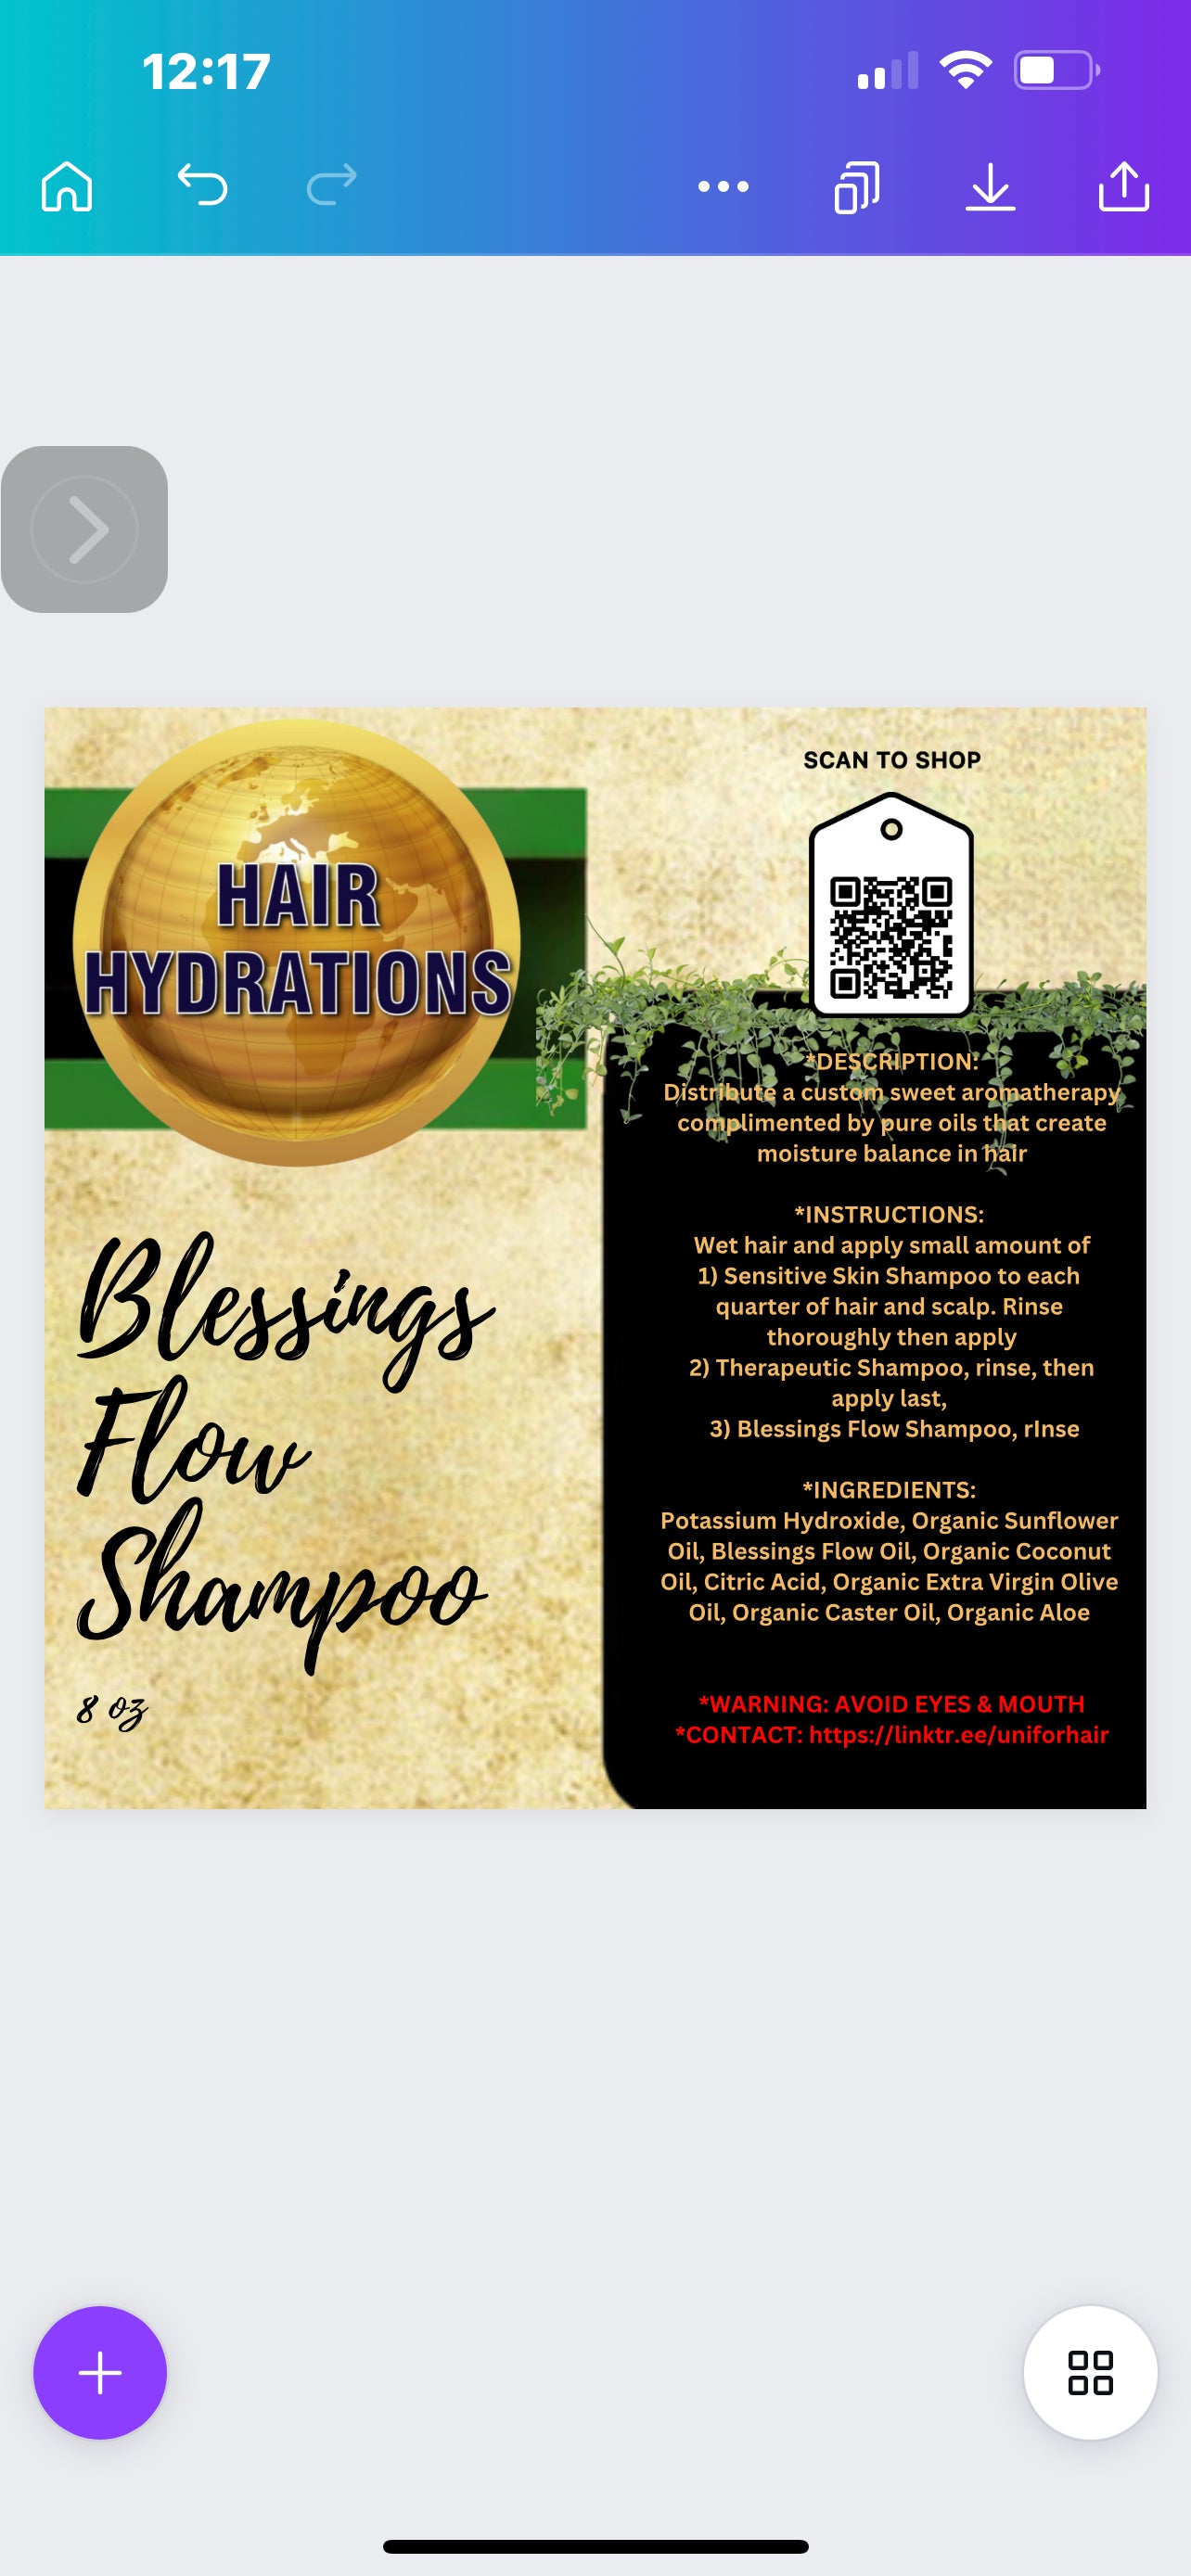 Hair Hydrations Blessings Flow Shampoo